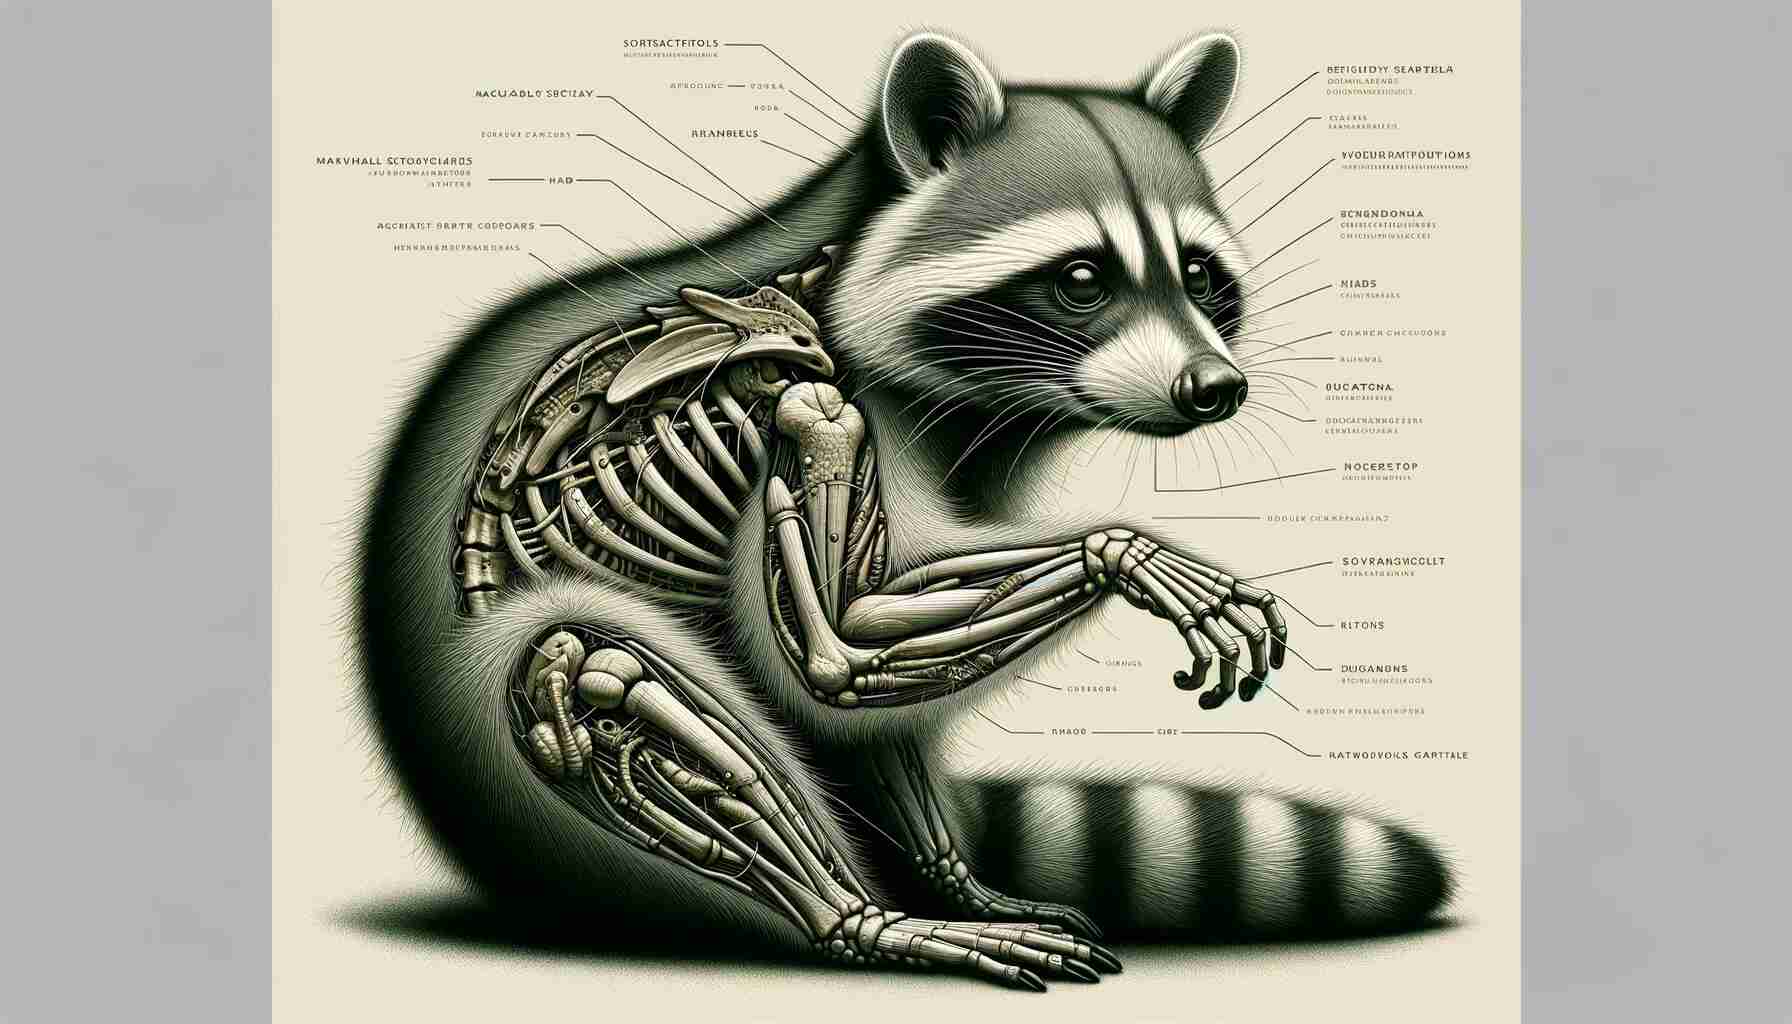 Here is a detailed image focusing on the physical attributes of raccoons, specifically their anatomy. It includes representations of the raccoon's skeletal and muscular systems, highlighting their structure and strength. The image also showcases the raccoon's dexterous hands and sensory organs, such as their eyes and ears, illustrating their adaptations for nocturnal activities. This visual provides an educational insight into the unique physical characteristics of raccoons.